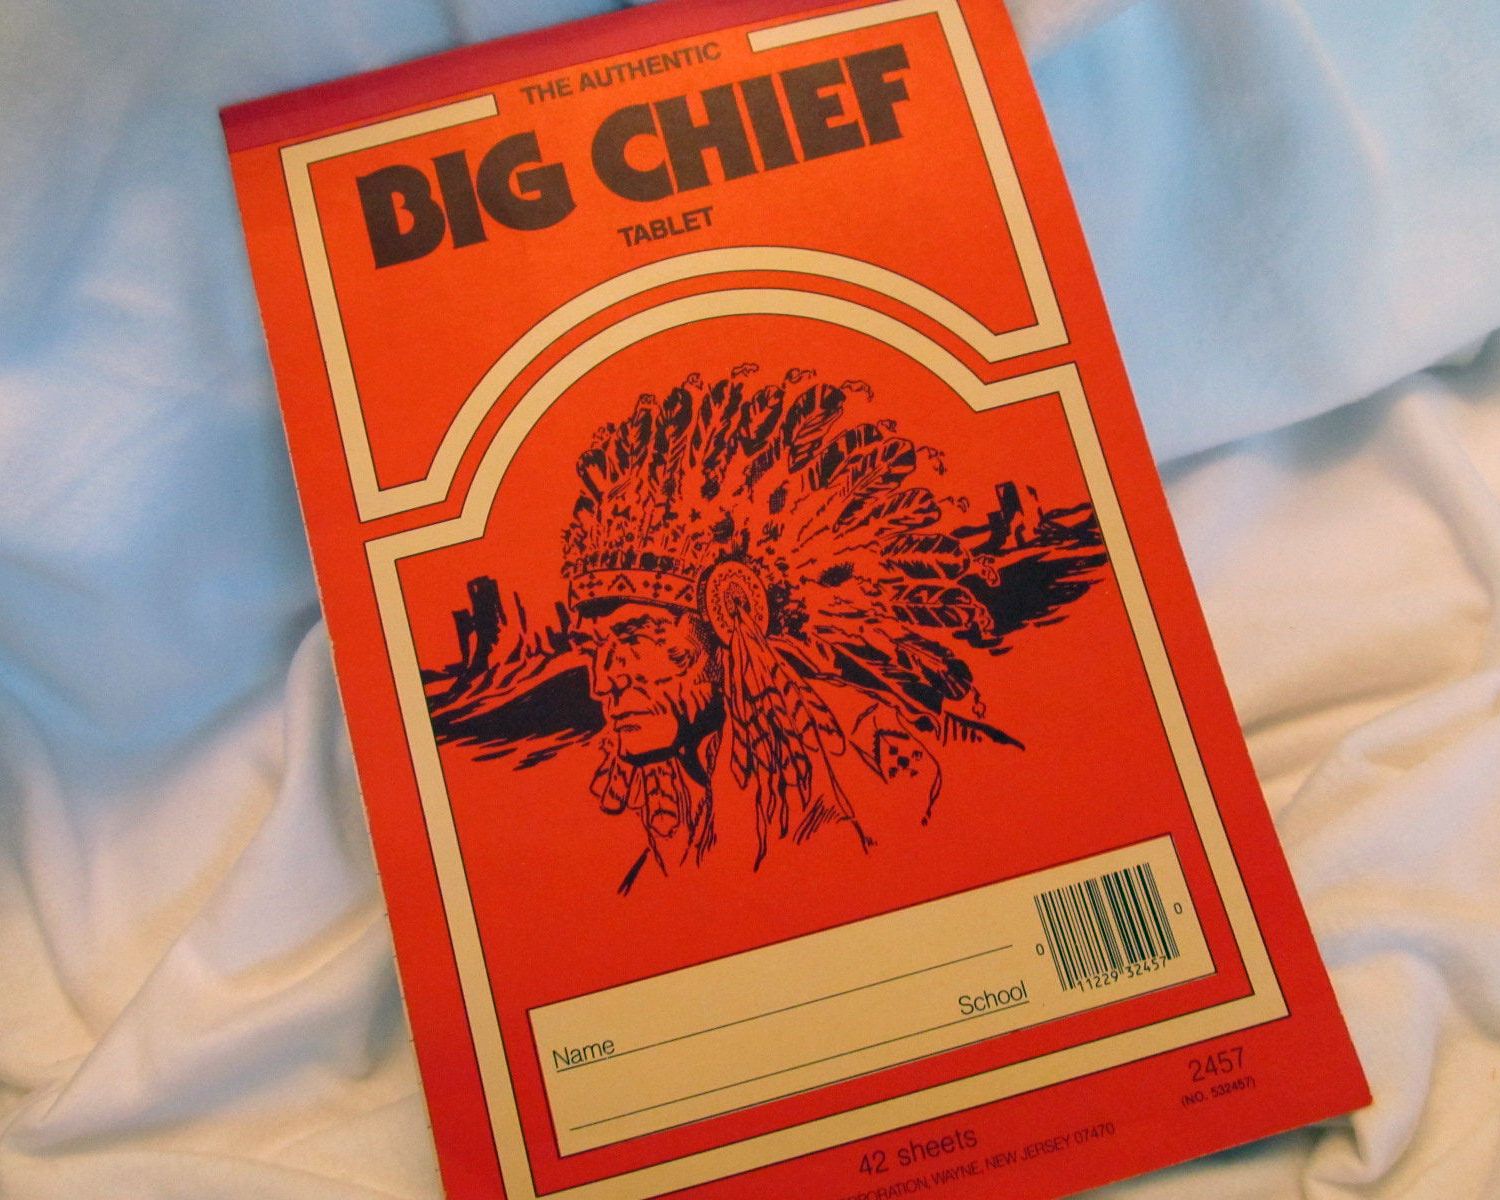 Big Chief probably wouldn't fly today (just ask the embattled Chief Wahoo) but these ubiquitous thick red tablets were a common sight on school desks throughout the '50s, '60s, and '70s. Production changed hands <a href="https://doubledranch.com/blogs/double-talk/170116103-rememories-back-to-school-big-chief-tablets">between a few companies</a> over the years, eventually coming to a halt roughly 20 years ago. But never underestimate the power of nostalgia: There are still <a href="https://www.amazon.com/Big-Chief-Writing-Primary-Springfield/dp/B0094ITC9Y/ref=as_li_ss_tl?ie=UTF8&linkCode=ll1&tag=msnshop-20&linkId=078b9628fcb7e7be1b91666bd47e328b&language=en_US">versions on Amazon</a> up for grabs.